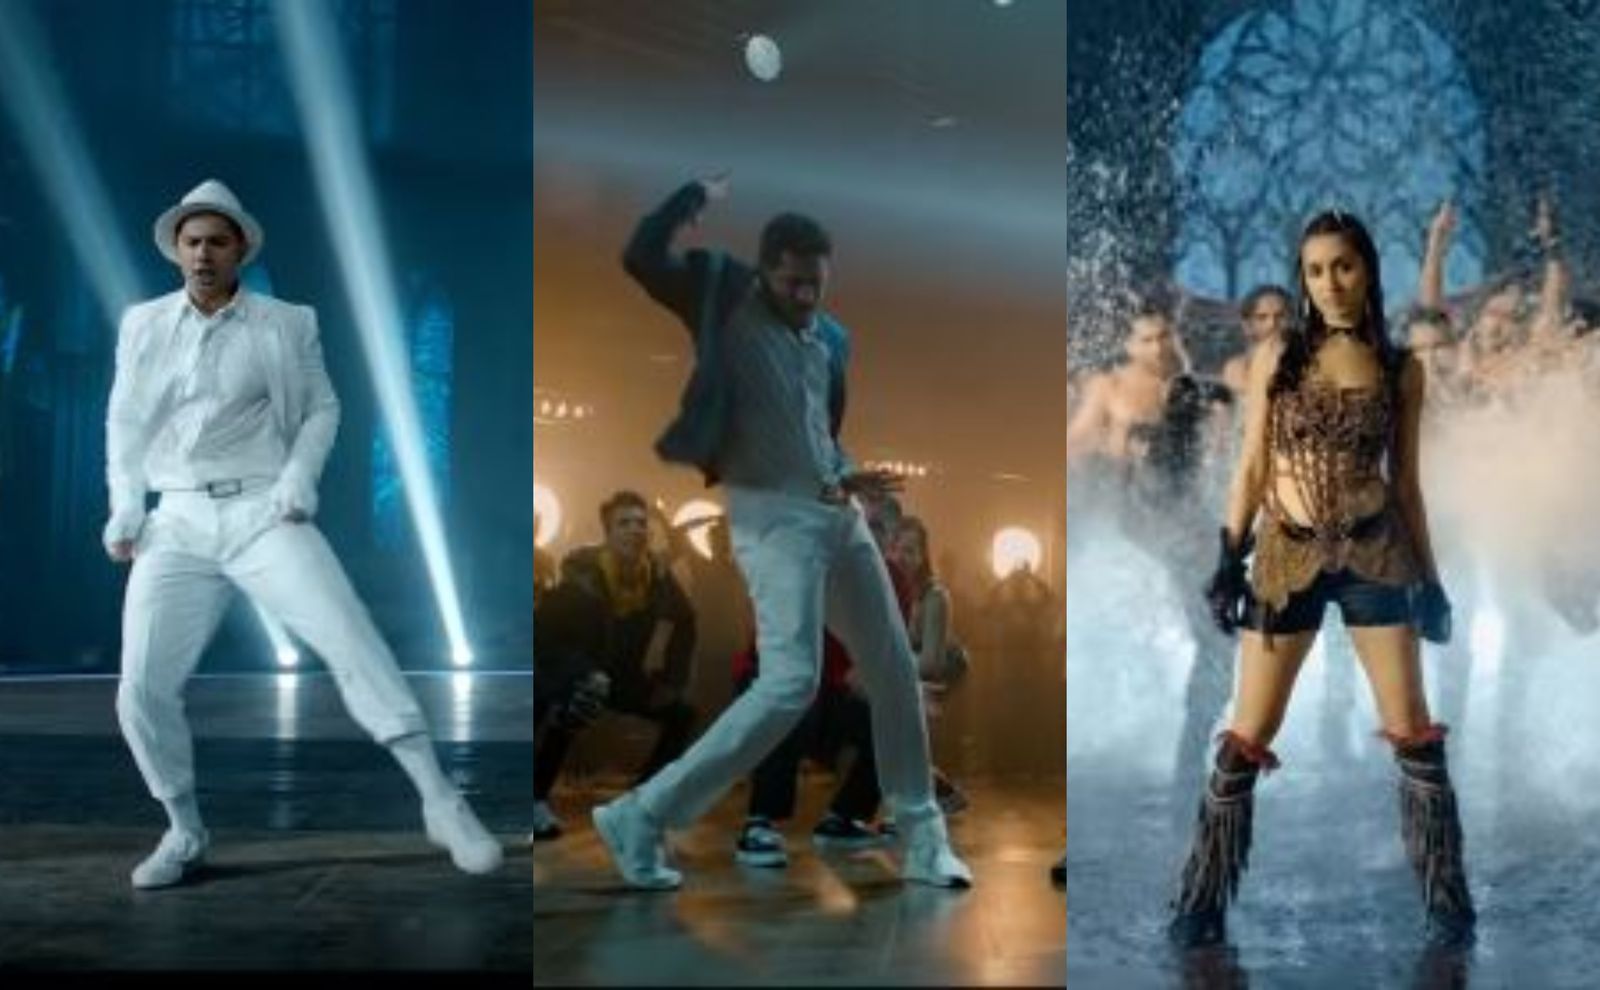 Street Dancer 3D Song Muqabala: Varun, Shraddha Have Nothing On Prabhudeva's Effortless Dancing, As He Returns With His Iconic Number